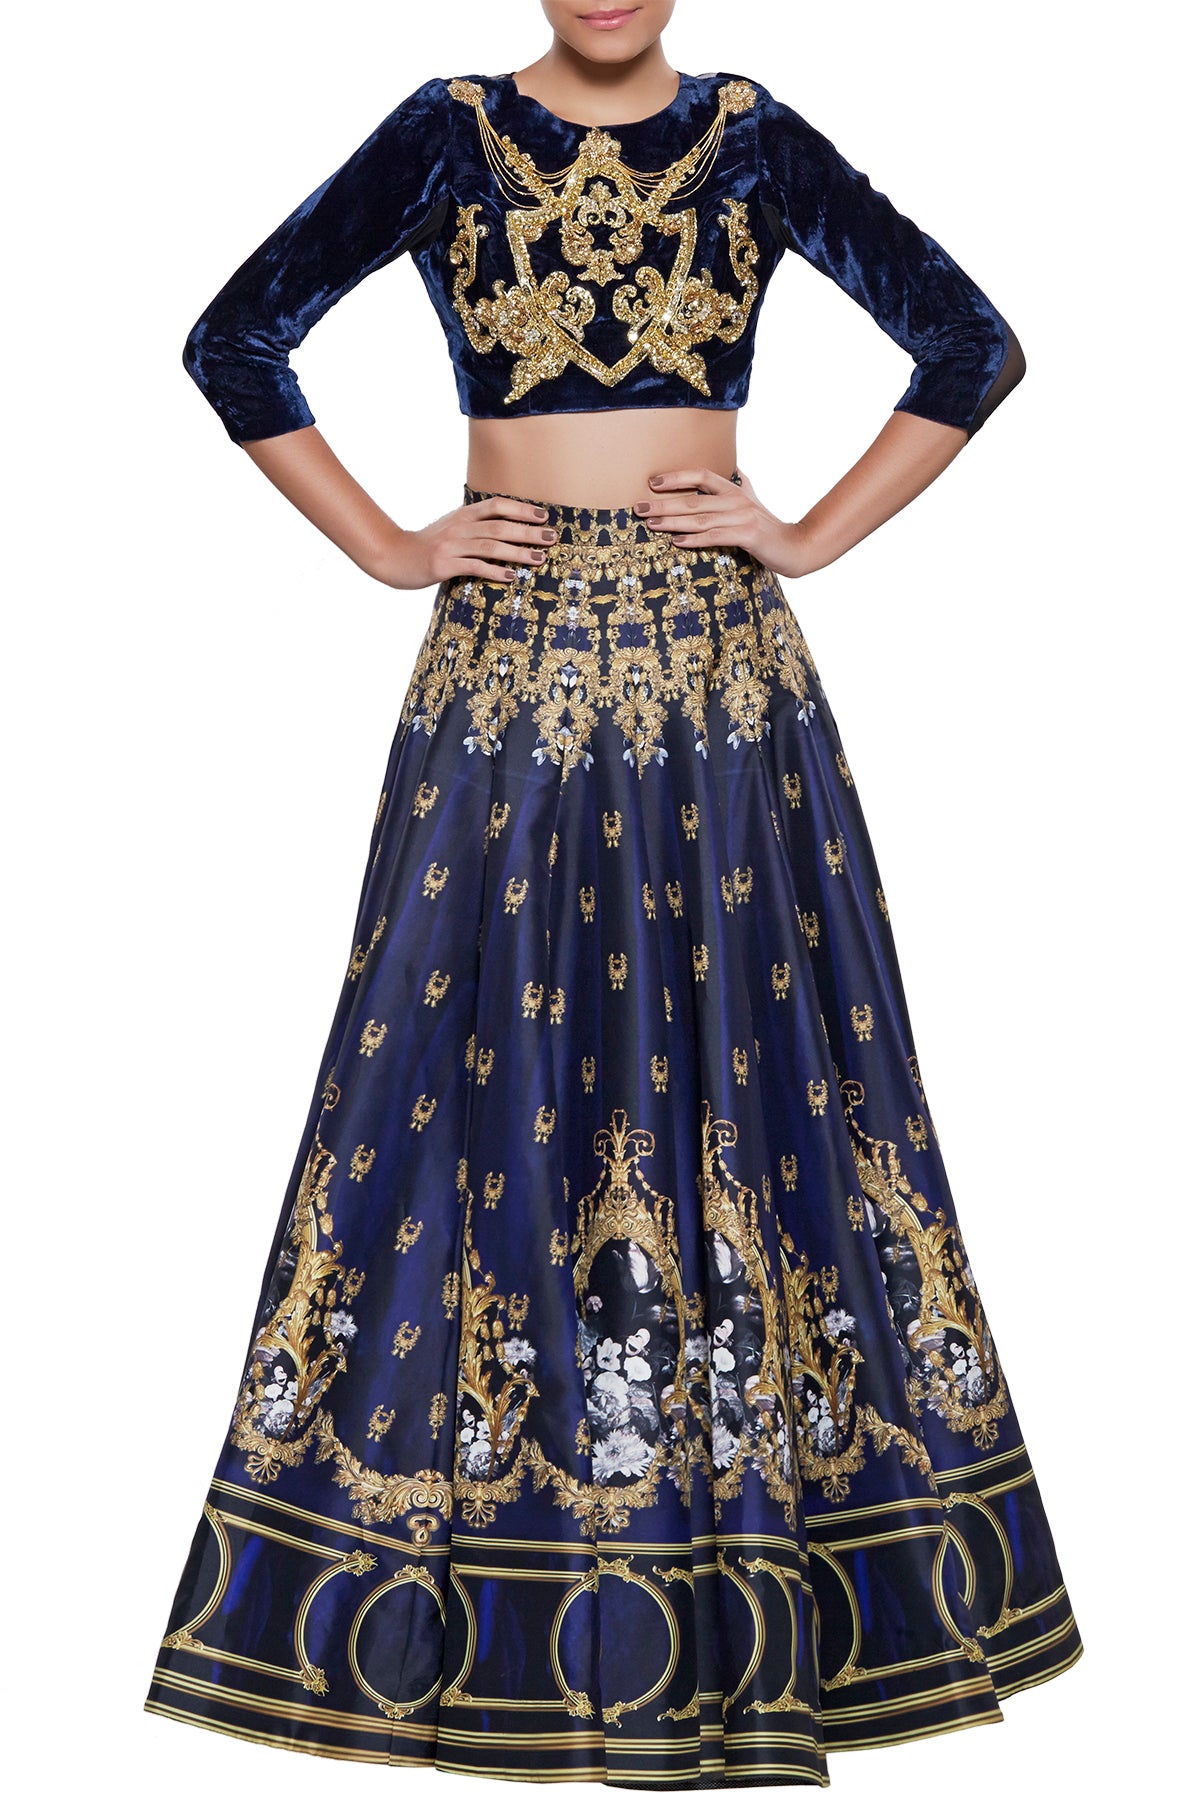 Cascading in silk with a class of the ages, our printed navy lehenga like a midnight dream is your best bet for the next big royal wedding. Its velvet and mesh crop top is a sheer masterpiece and keeps the outfit a step ahead of the season.